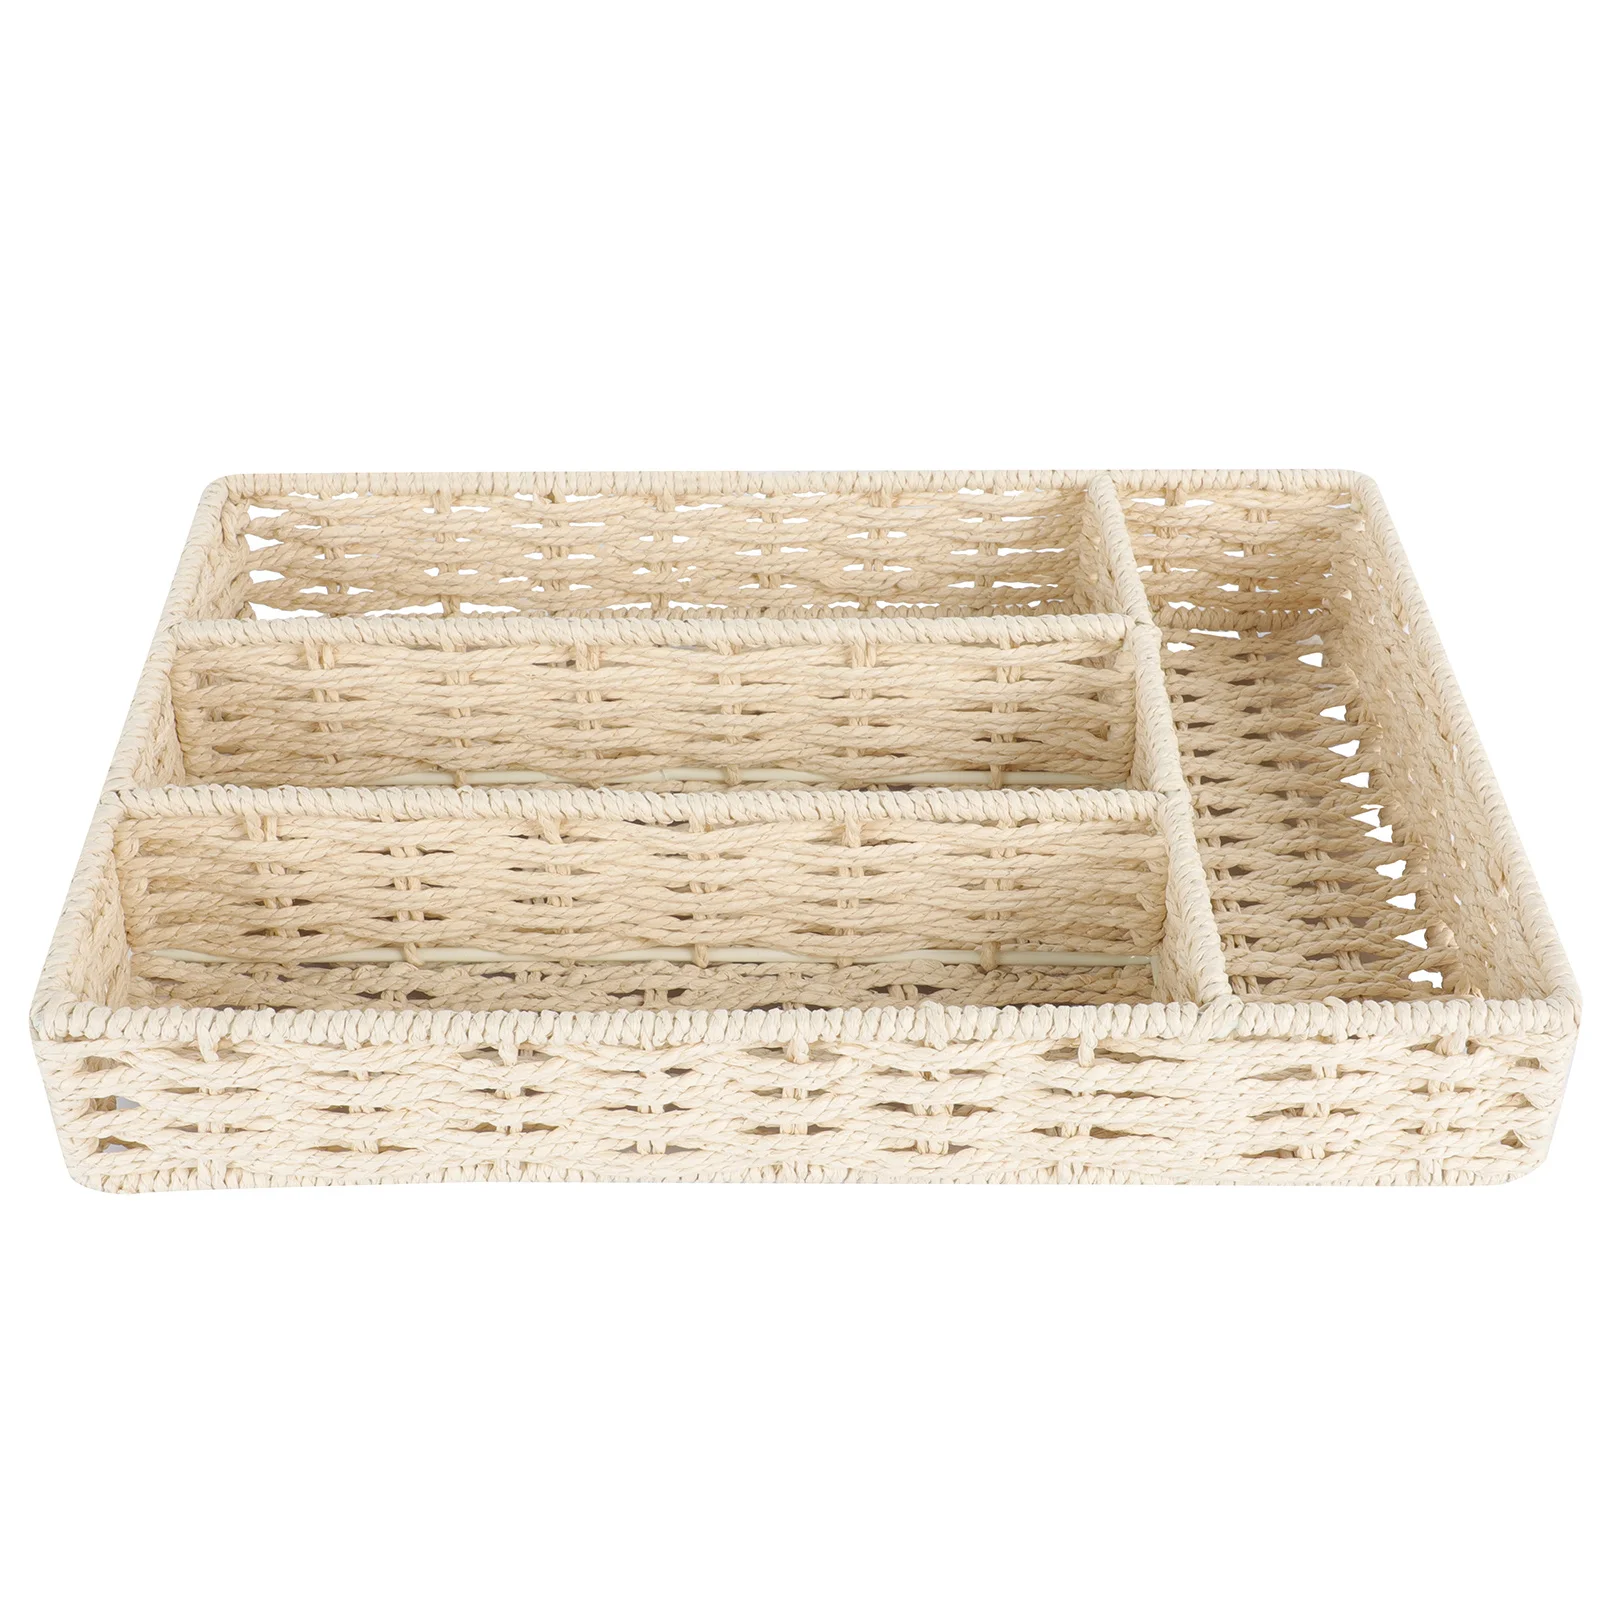 

Makeup Storage Drawers Four Grid Basket Sundries Container Handmade Closet Household Four-grid Baskets for bedroom